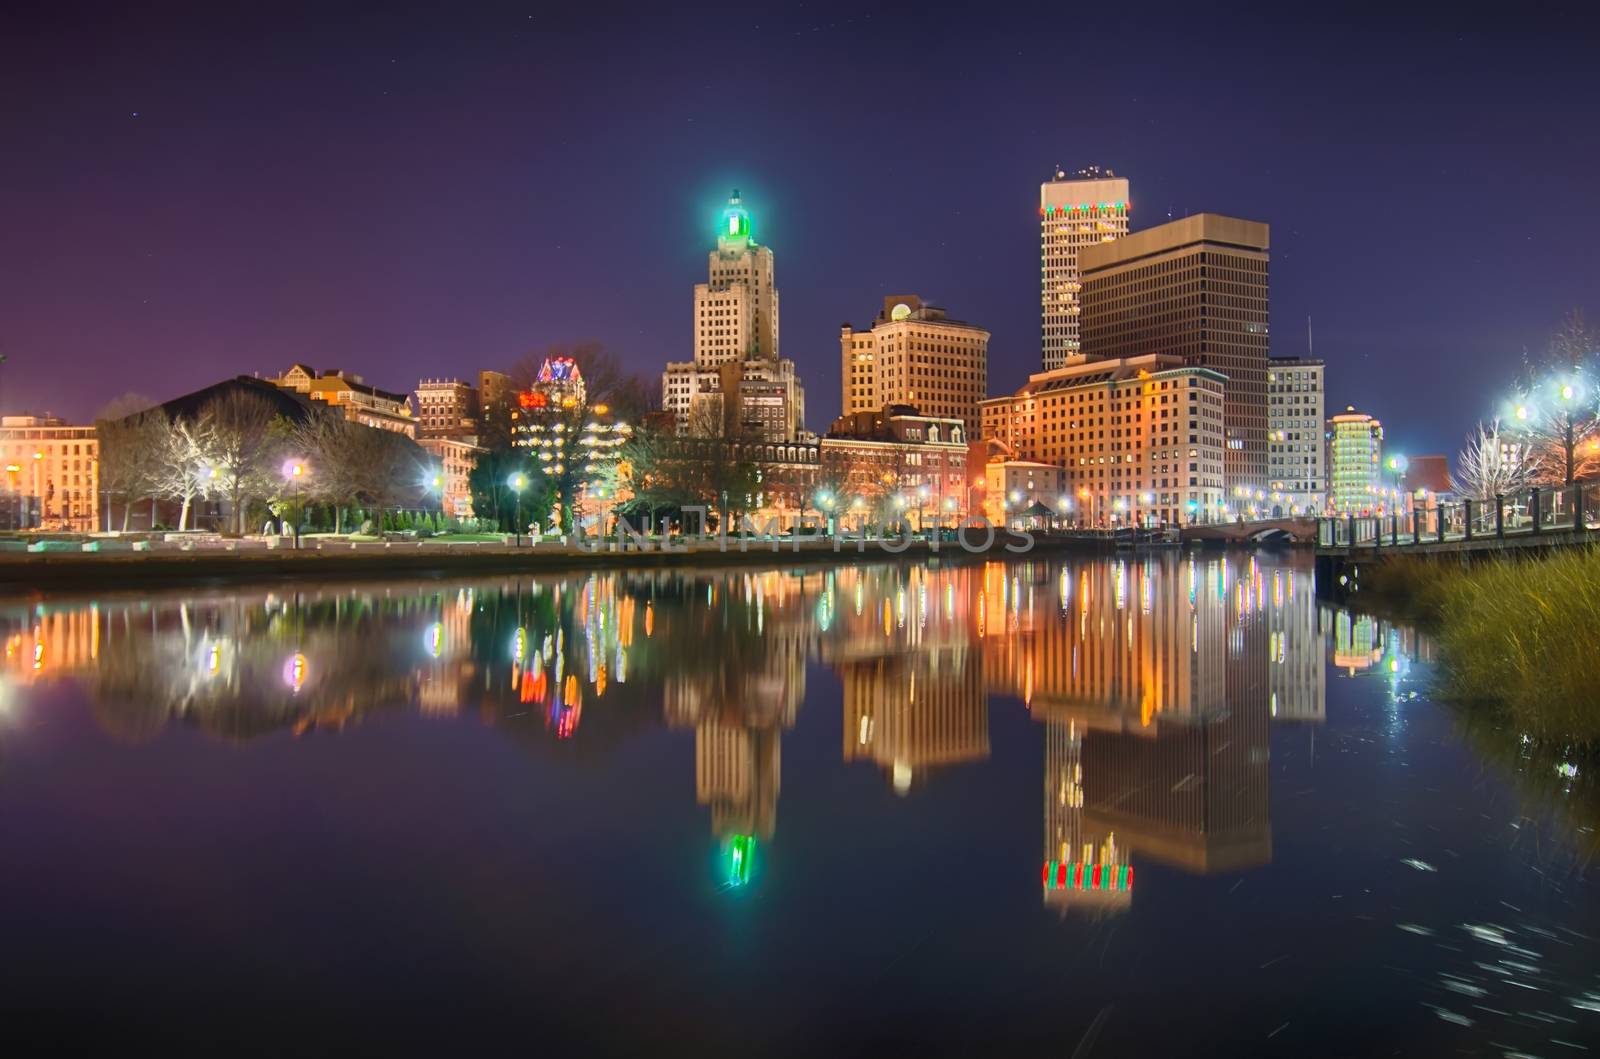 providence Rhode Island from the far side of the waterfront by digidreamgrafix